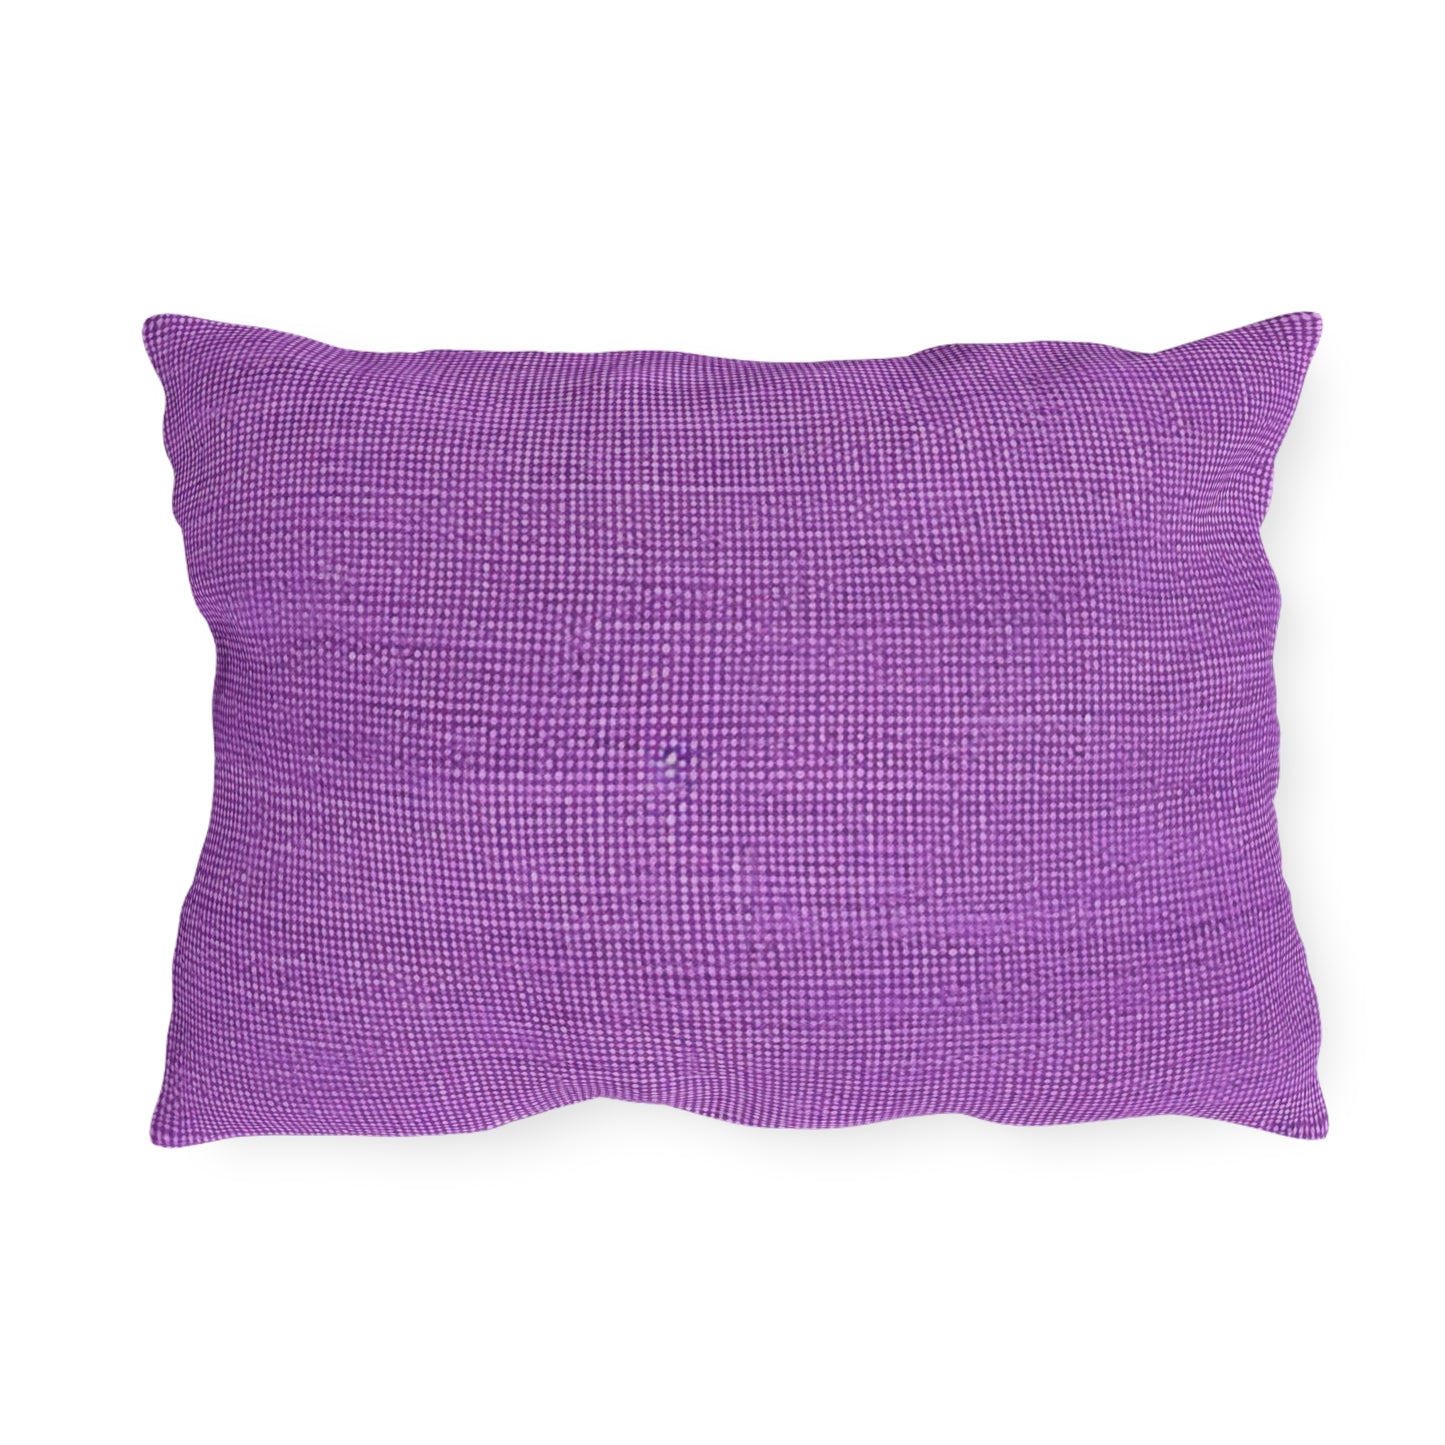 Hyper Iris Orchid Red: Denim-Inspired, Bold Style - Outdoor Pillows